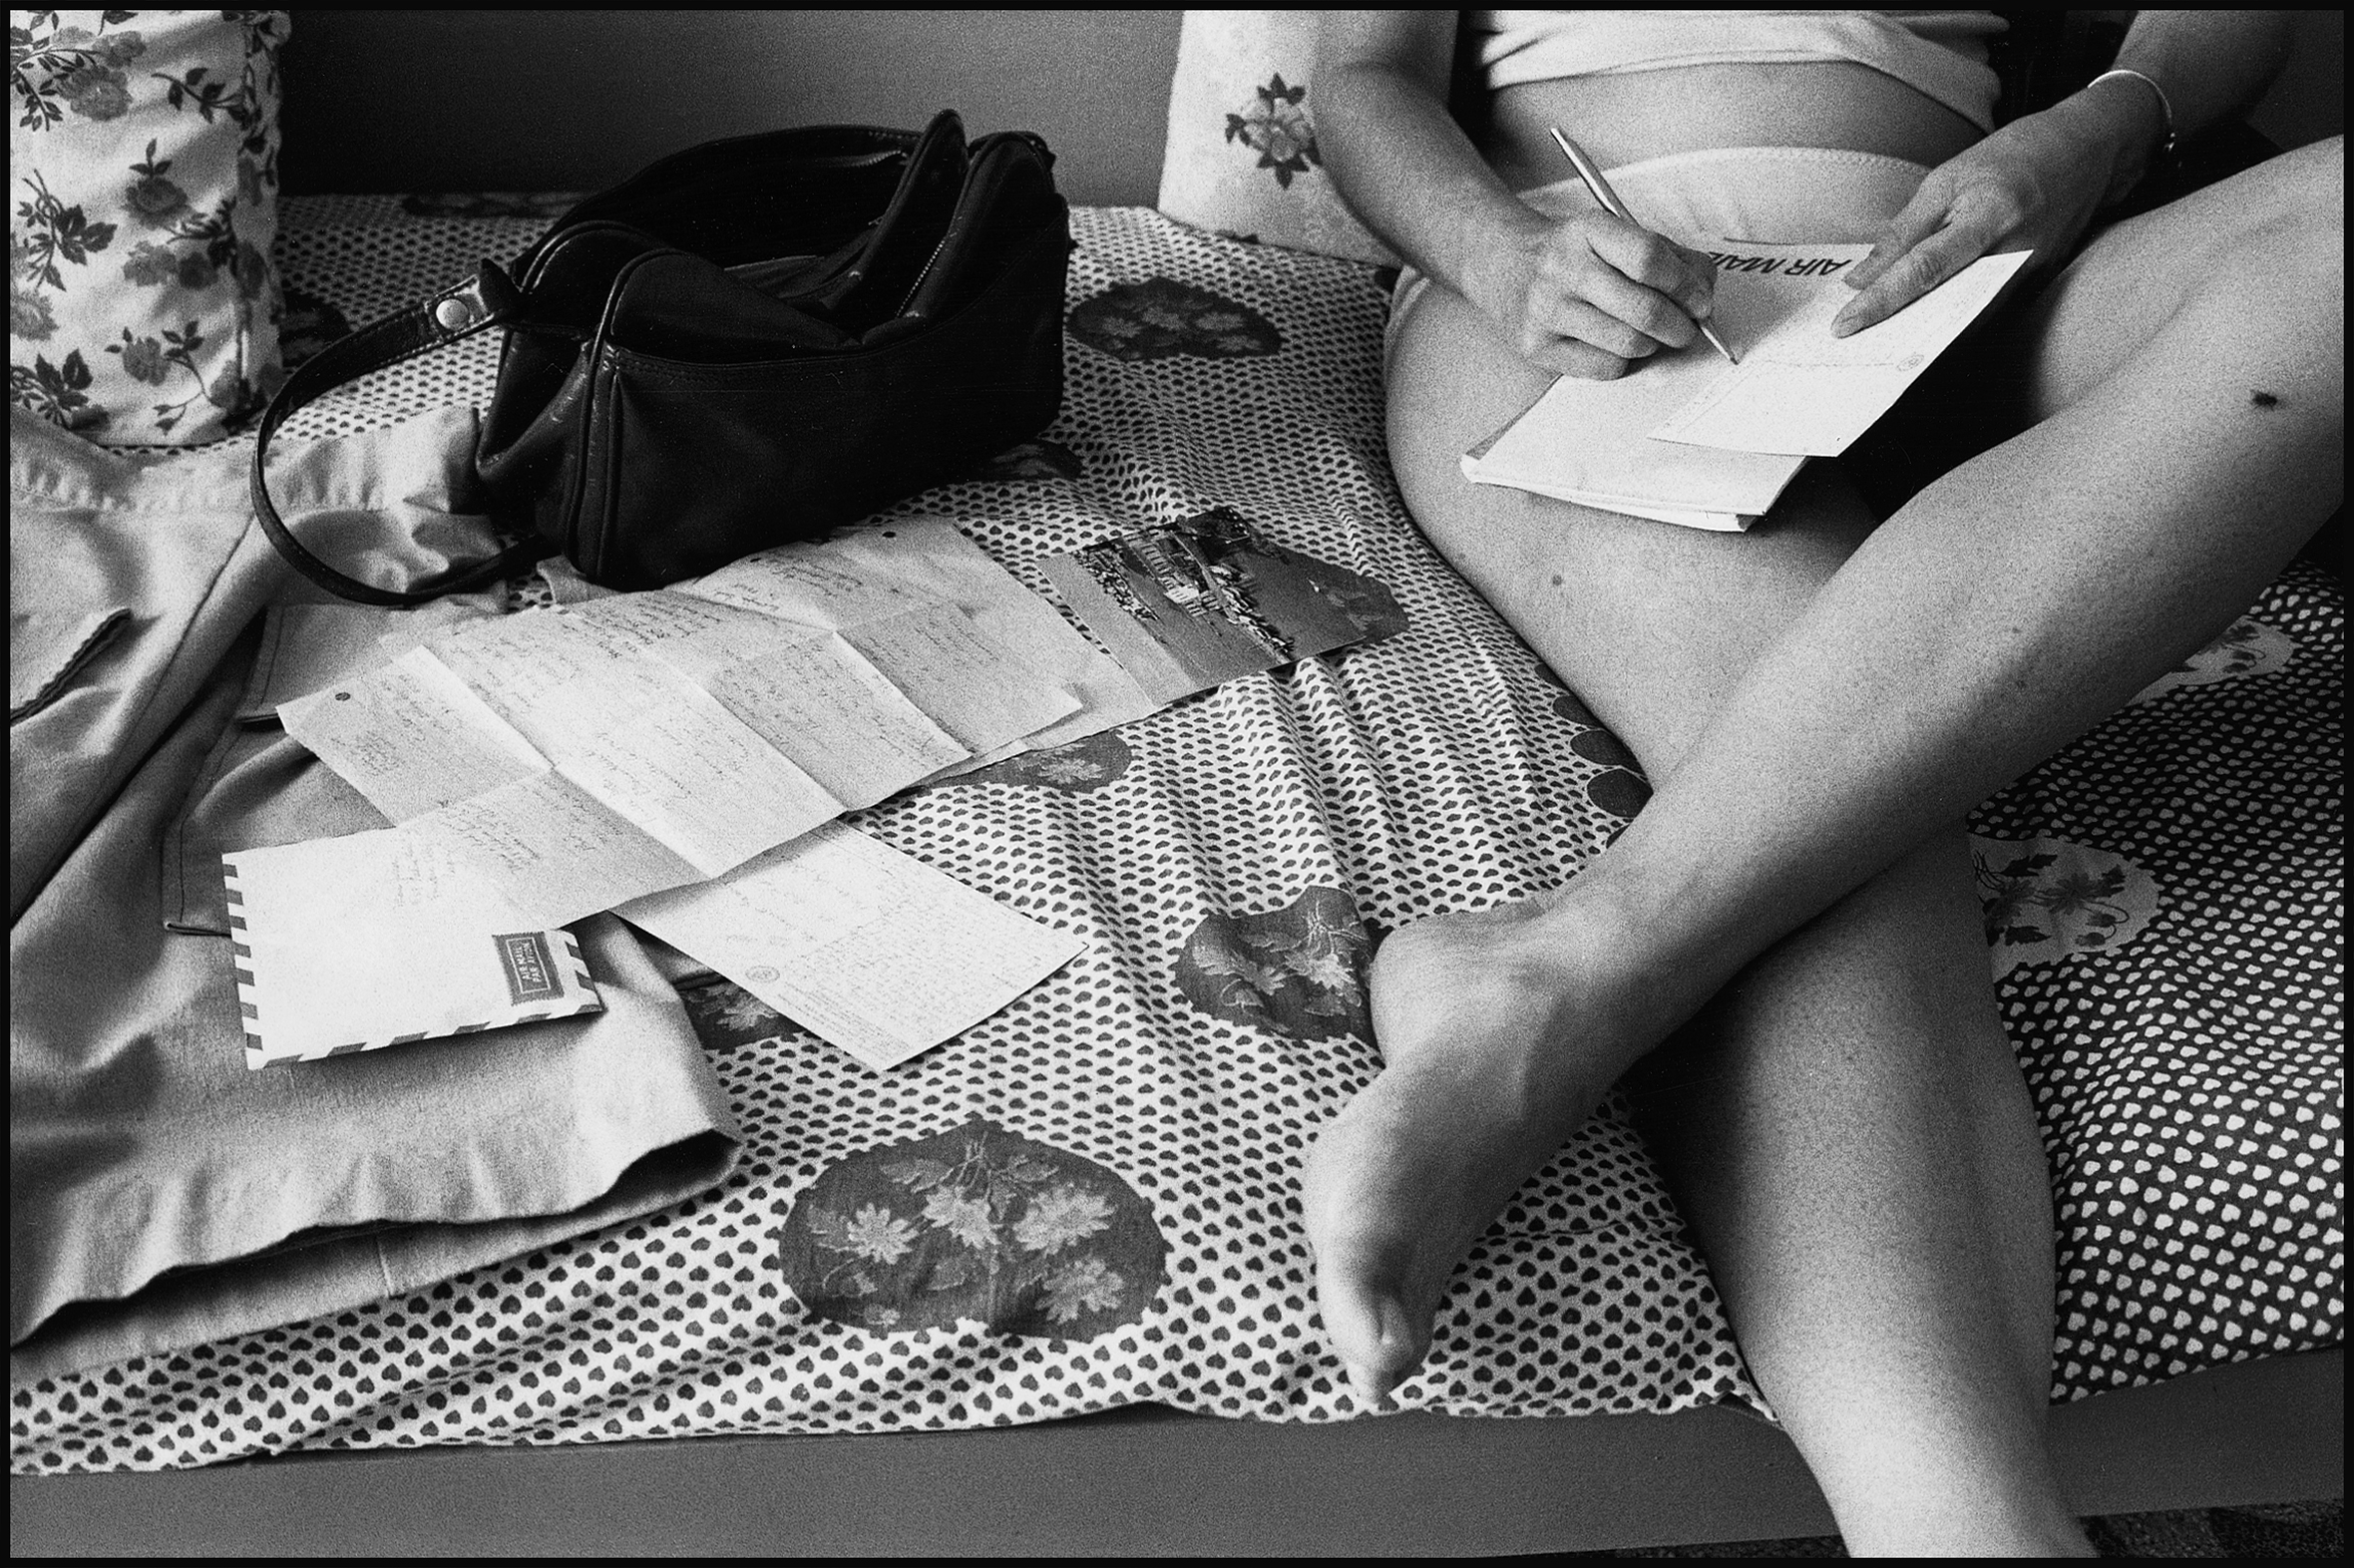 A woman is sitting on a bed with a pillow behind her against the wall writing a postcard on her lap; only the bottom half of her is visible. More postcards and letters are strewn over the bed along with a purse.